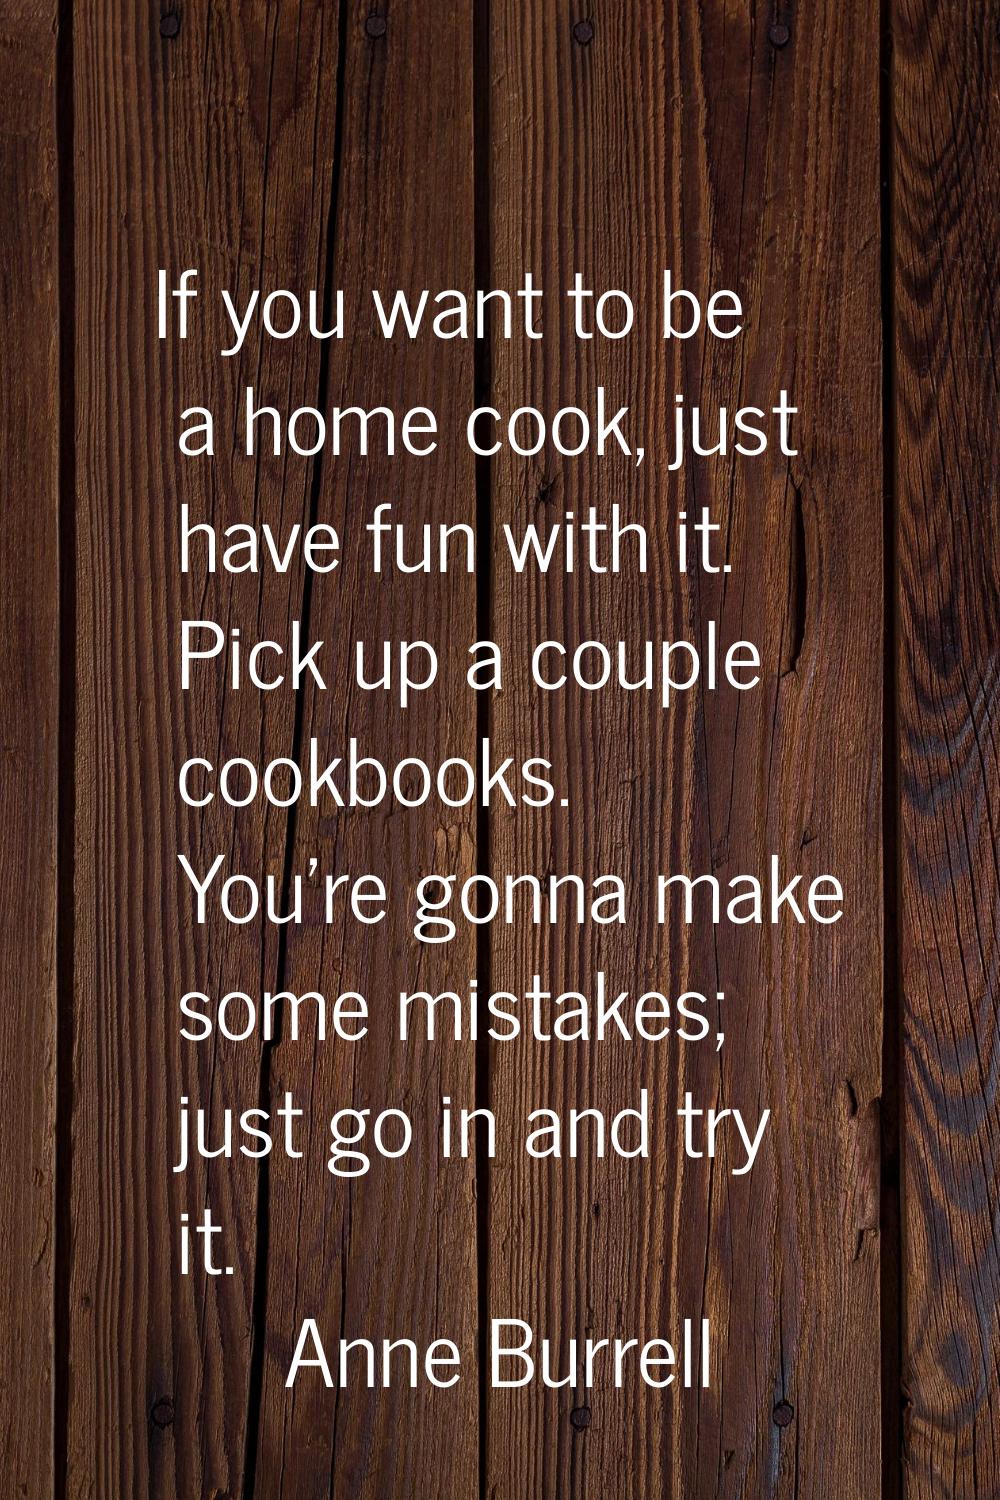 If you want to be a home cook, just have fun with it. Pick up a couple cookbooks. You're gonna make